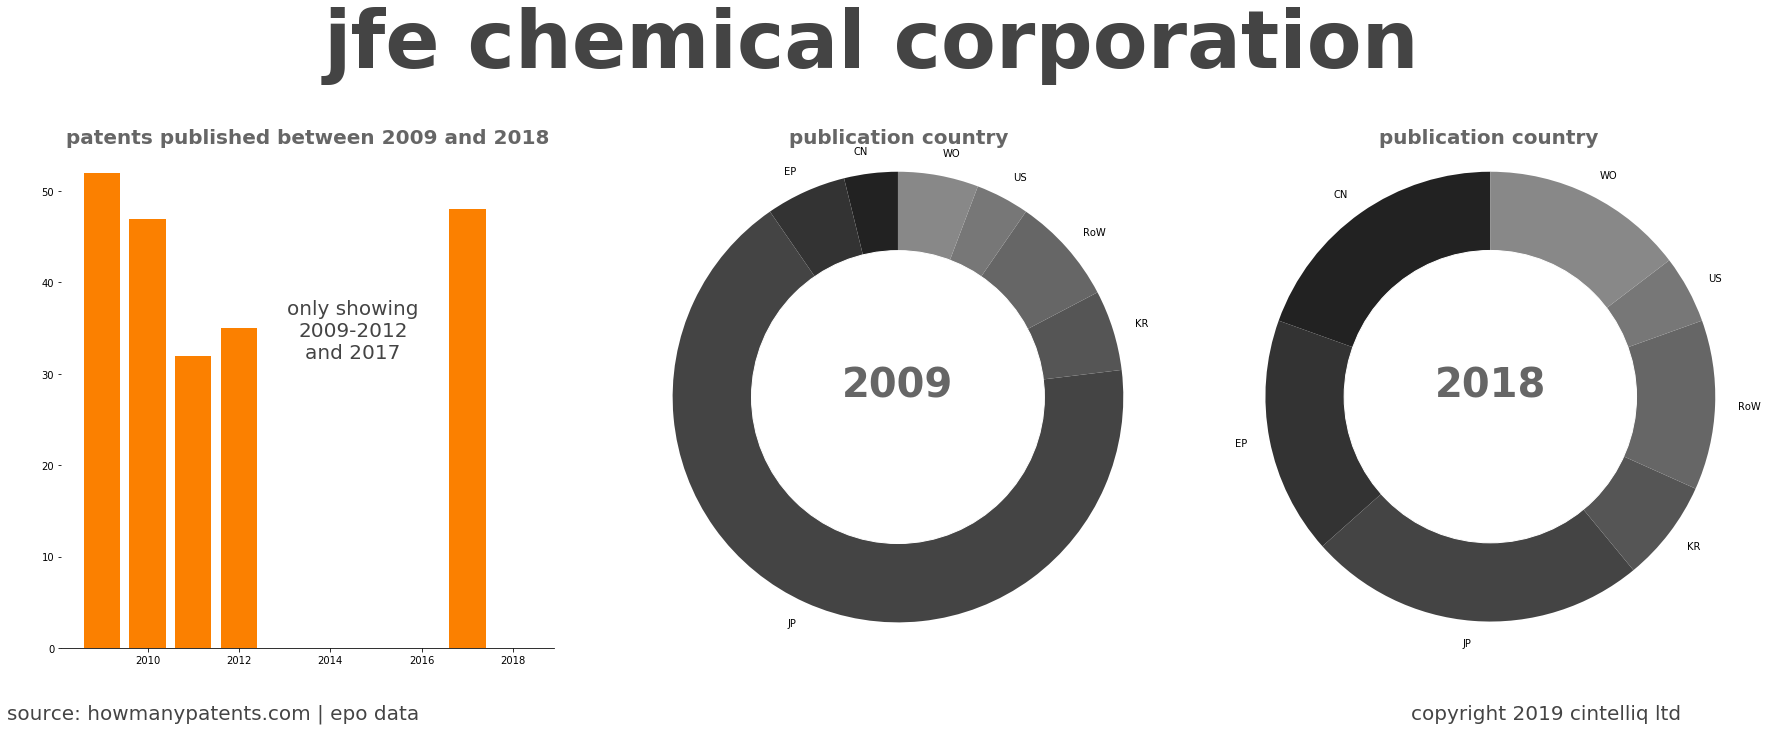 summary of patents for Jfe Chemical Corporation